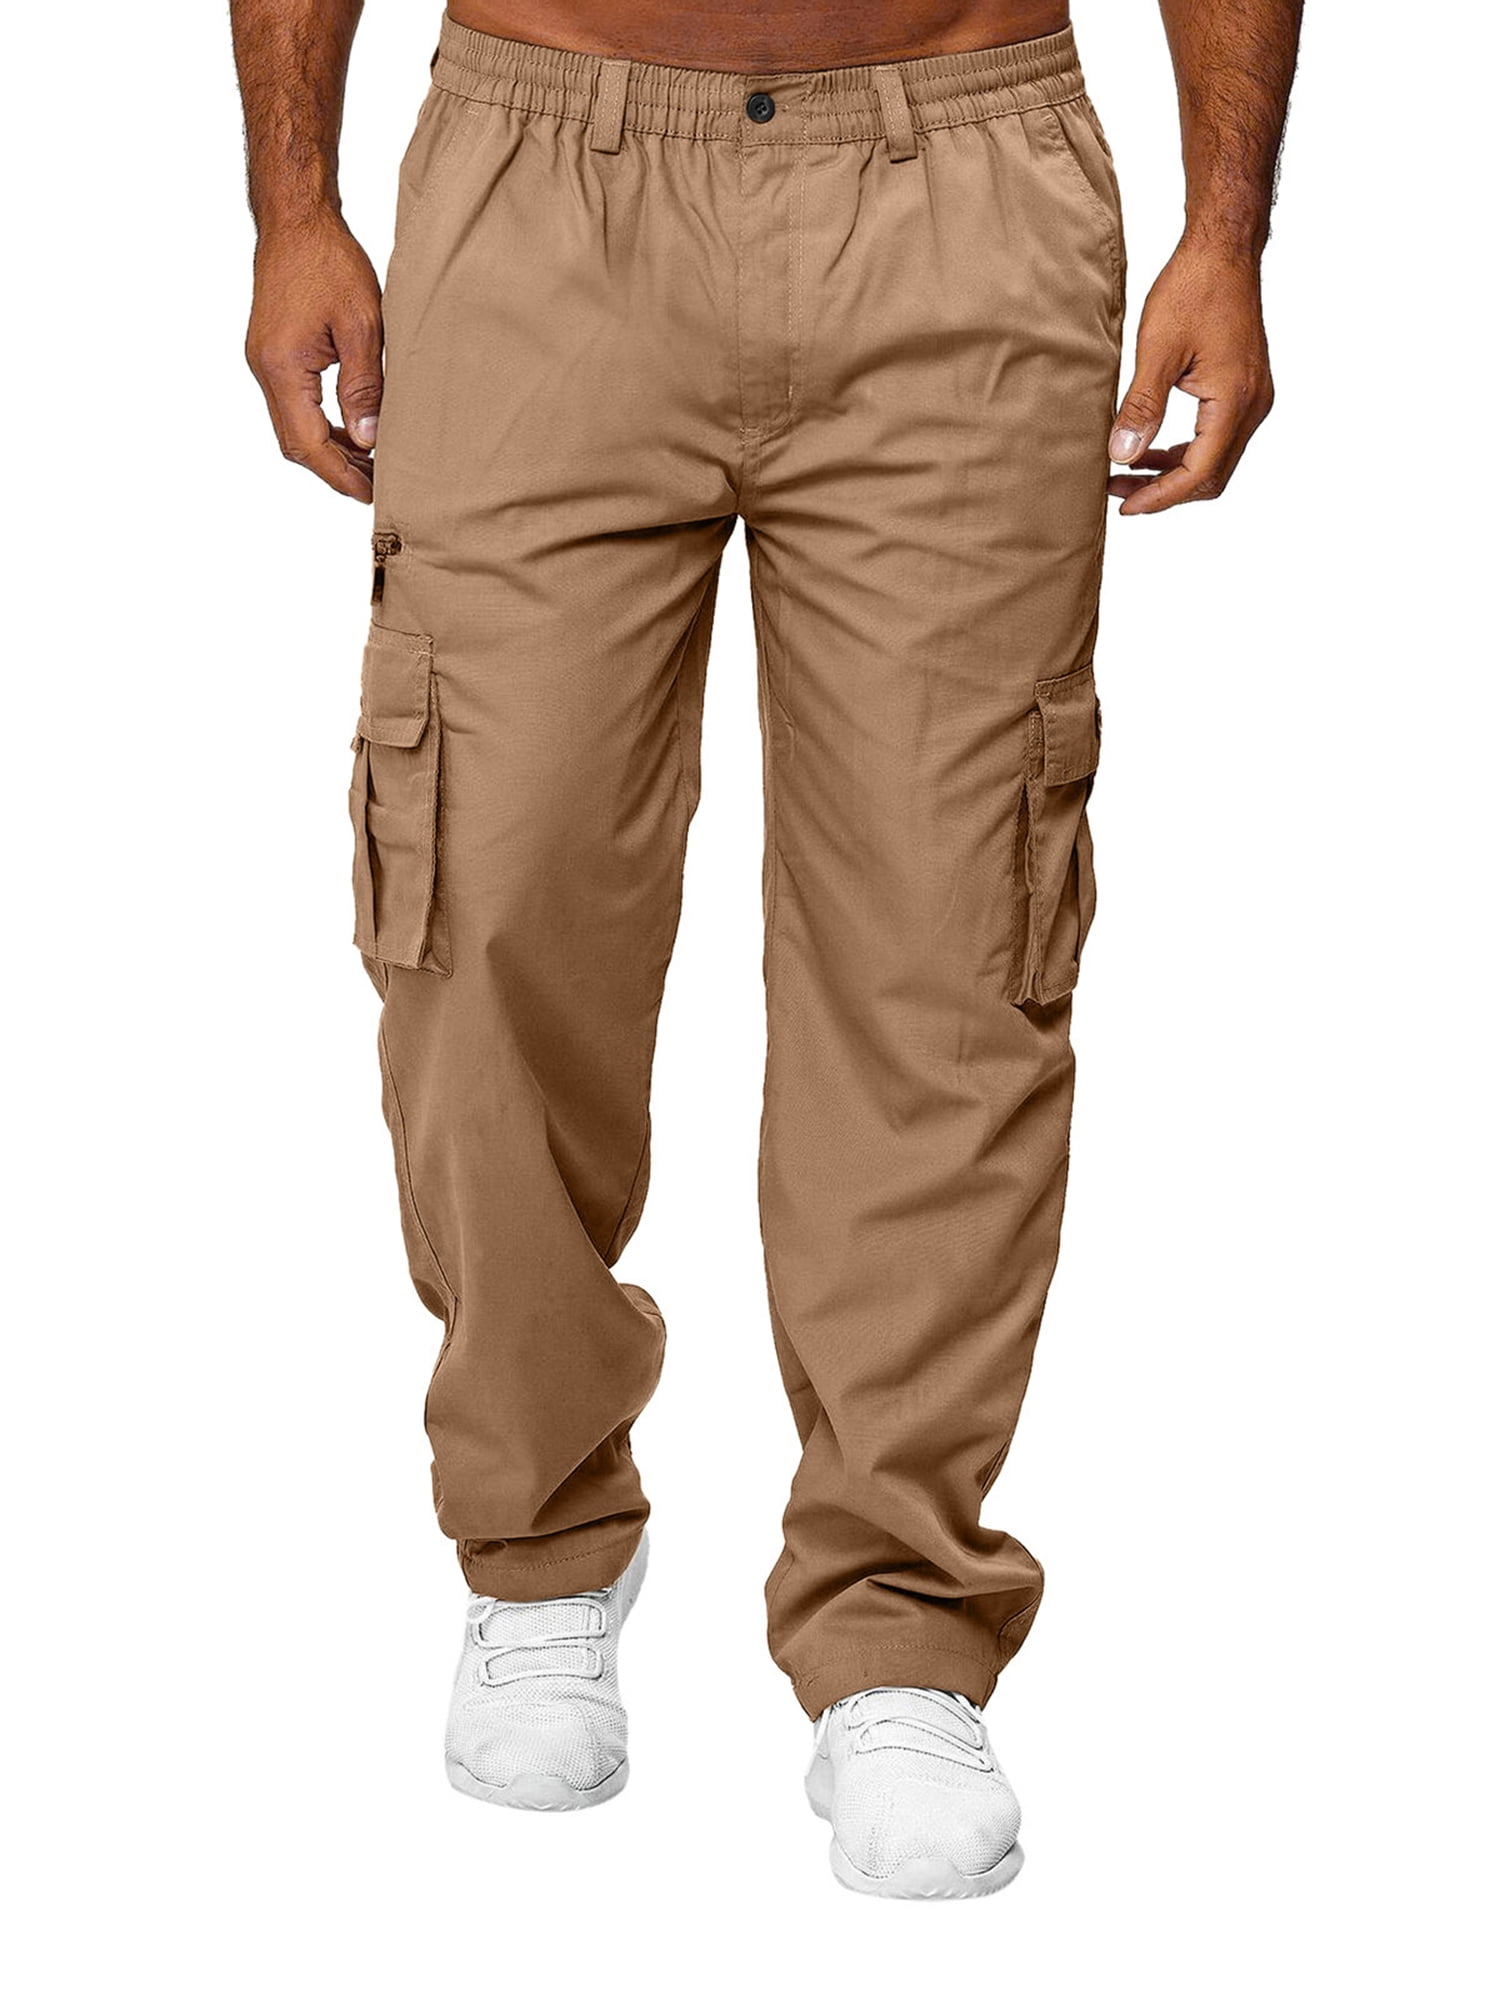 wybzd Men Casual Loose Straight Cargo Pants Elastic Waist Relaxed Fit  Straight Leg Trousers with Pockets Khaki M